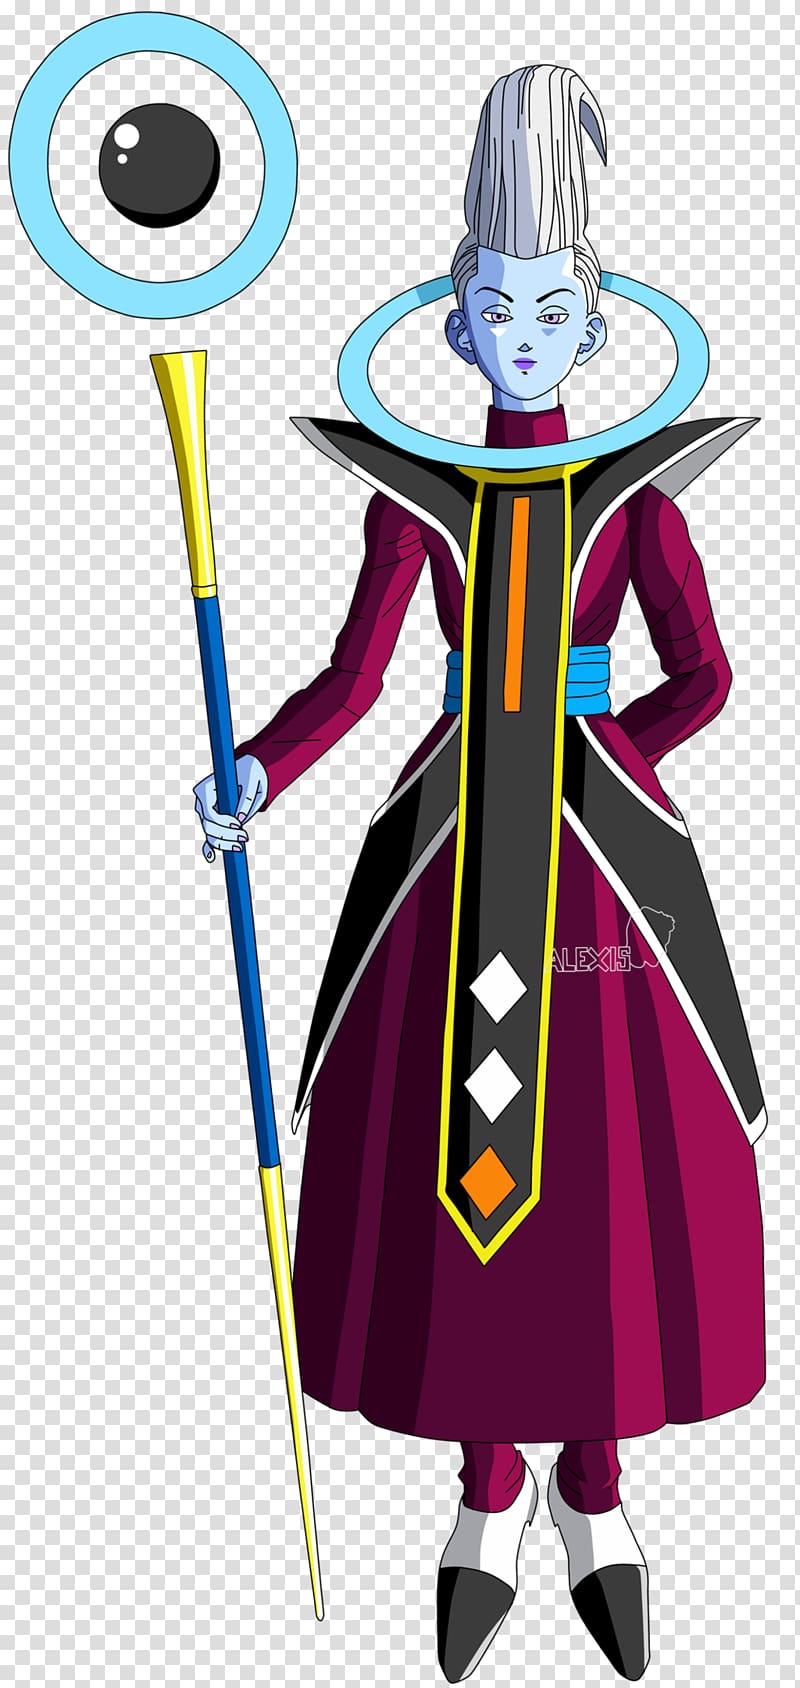 Dragon Ball Xenoverse 2 Majin Buu Videl Beerus, whis transparent background PNG clipart